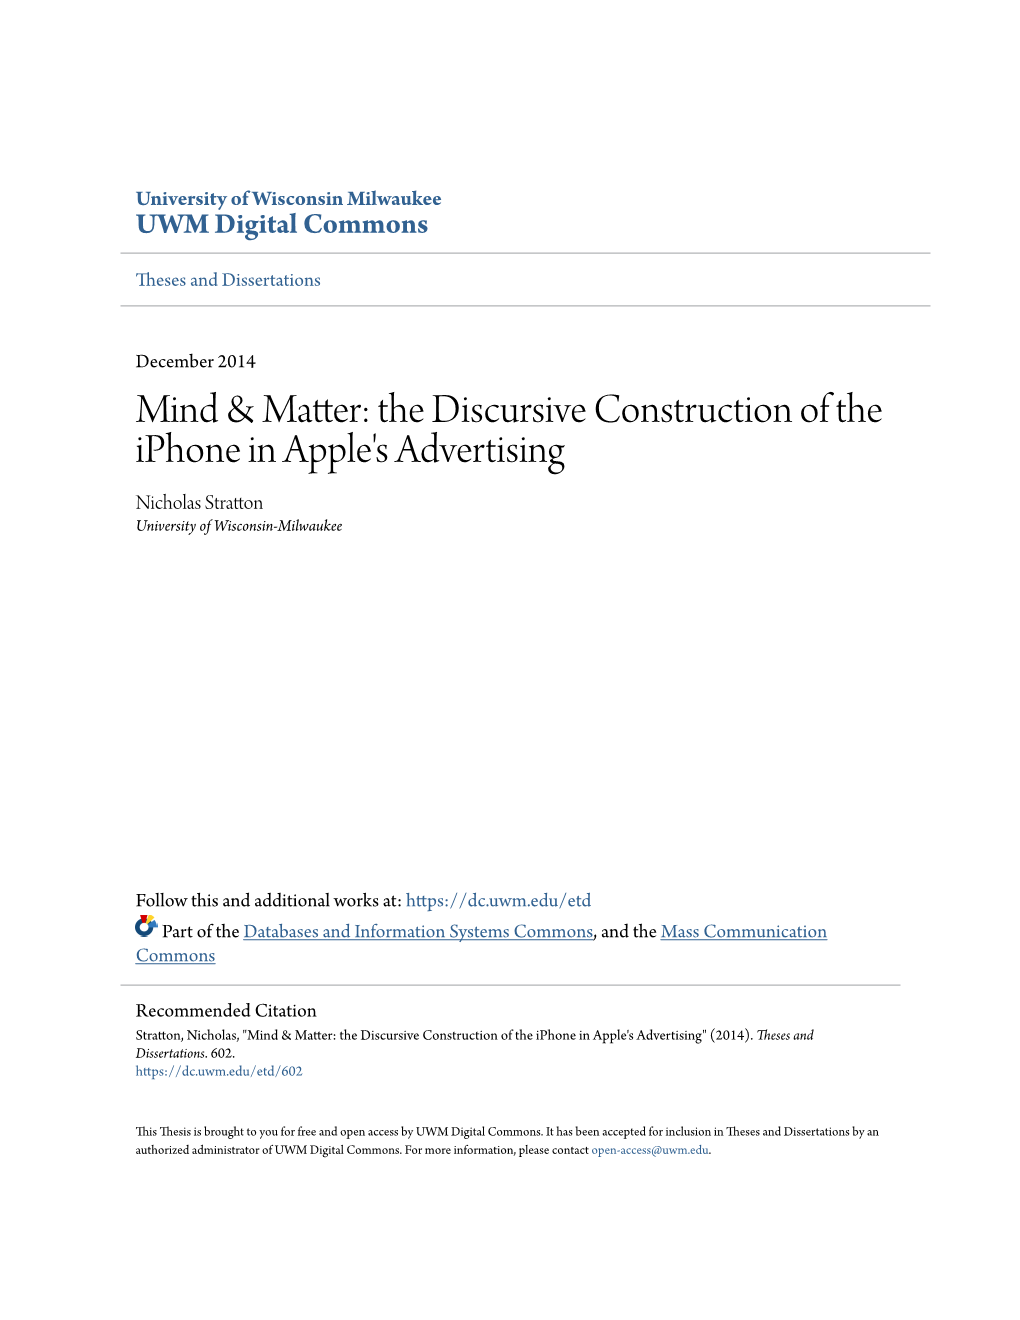 The Discursive Construction of the Iphone in Apple's Advertising Nicholas Stratton University of Wisconsin-Milwaukee